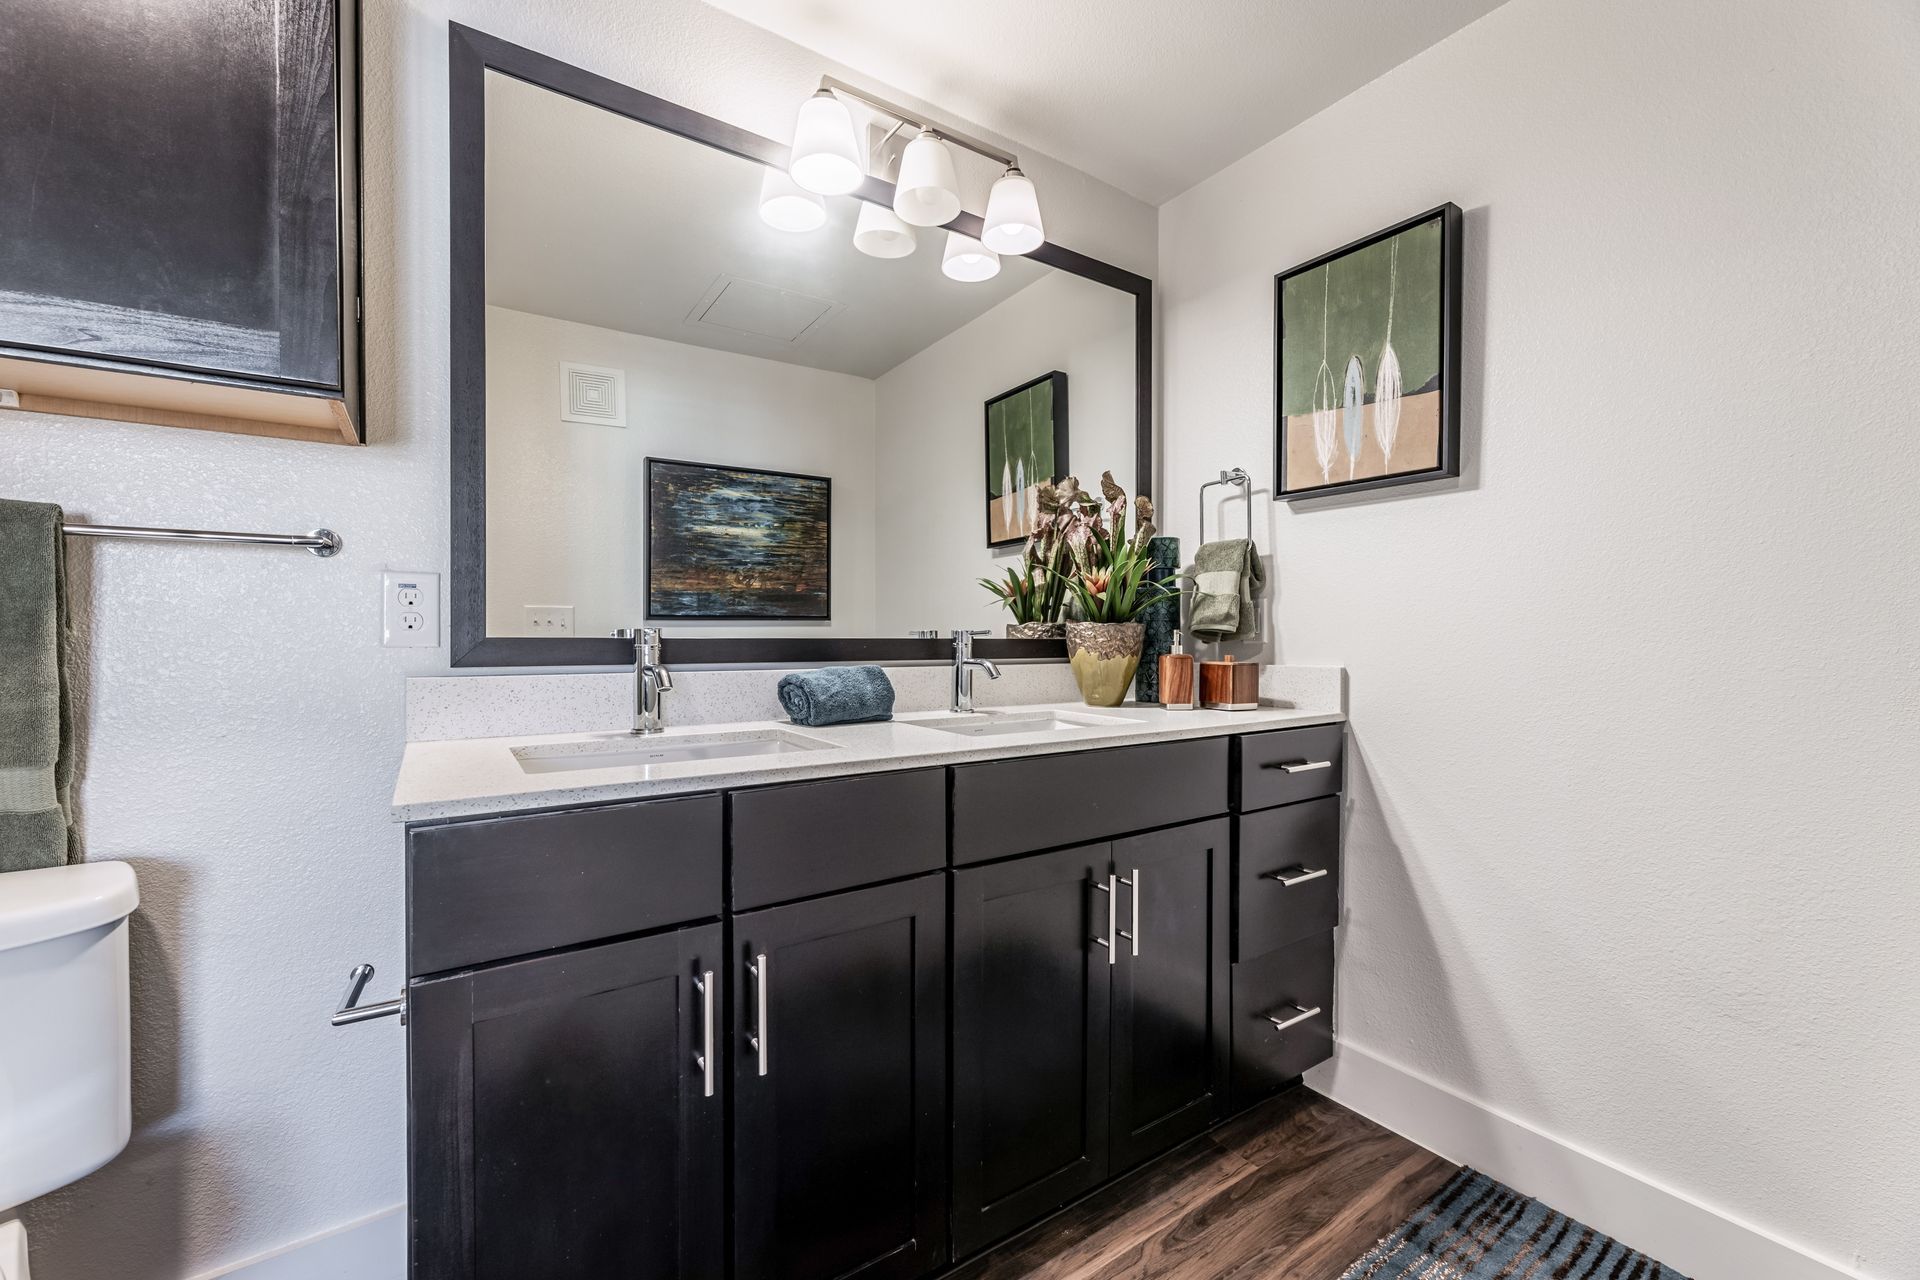 Luxury bathroom with two sinks, a toilet, and a large mirror at Parkside at Craig Ranch.